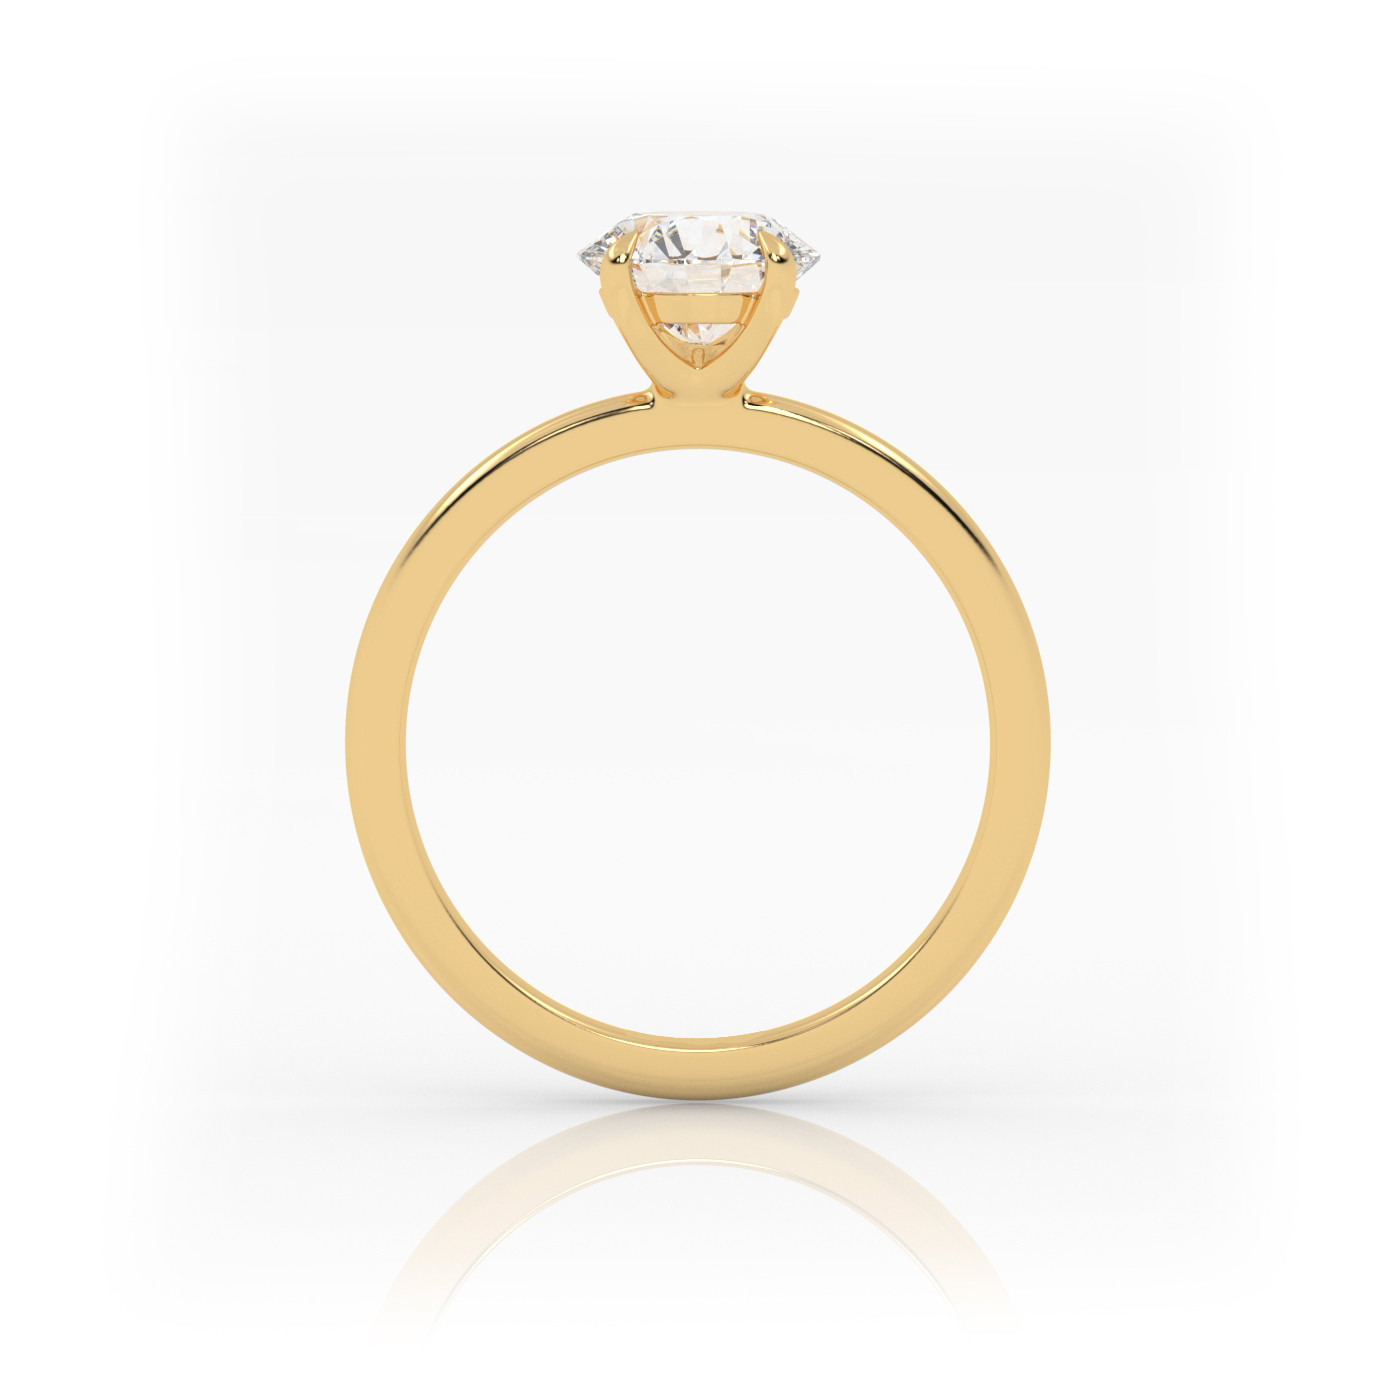 18K YELLOW GOLD Round Diamond Cut Solitaire Engagement Ring